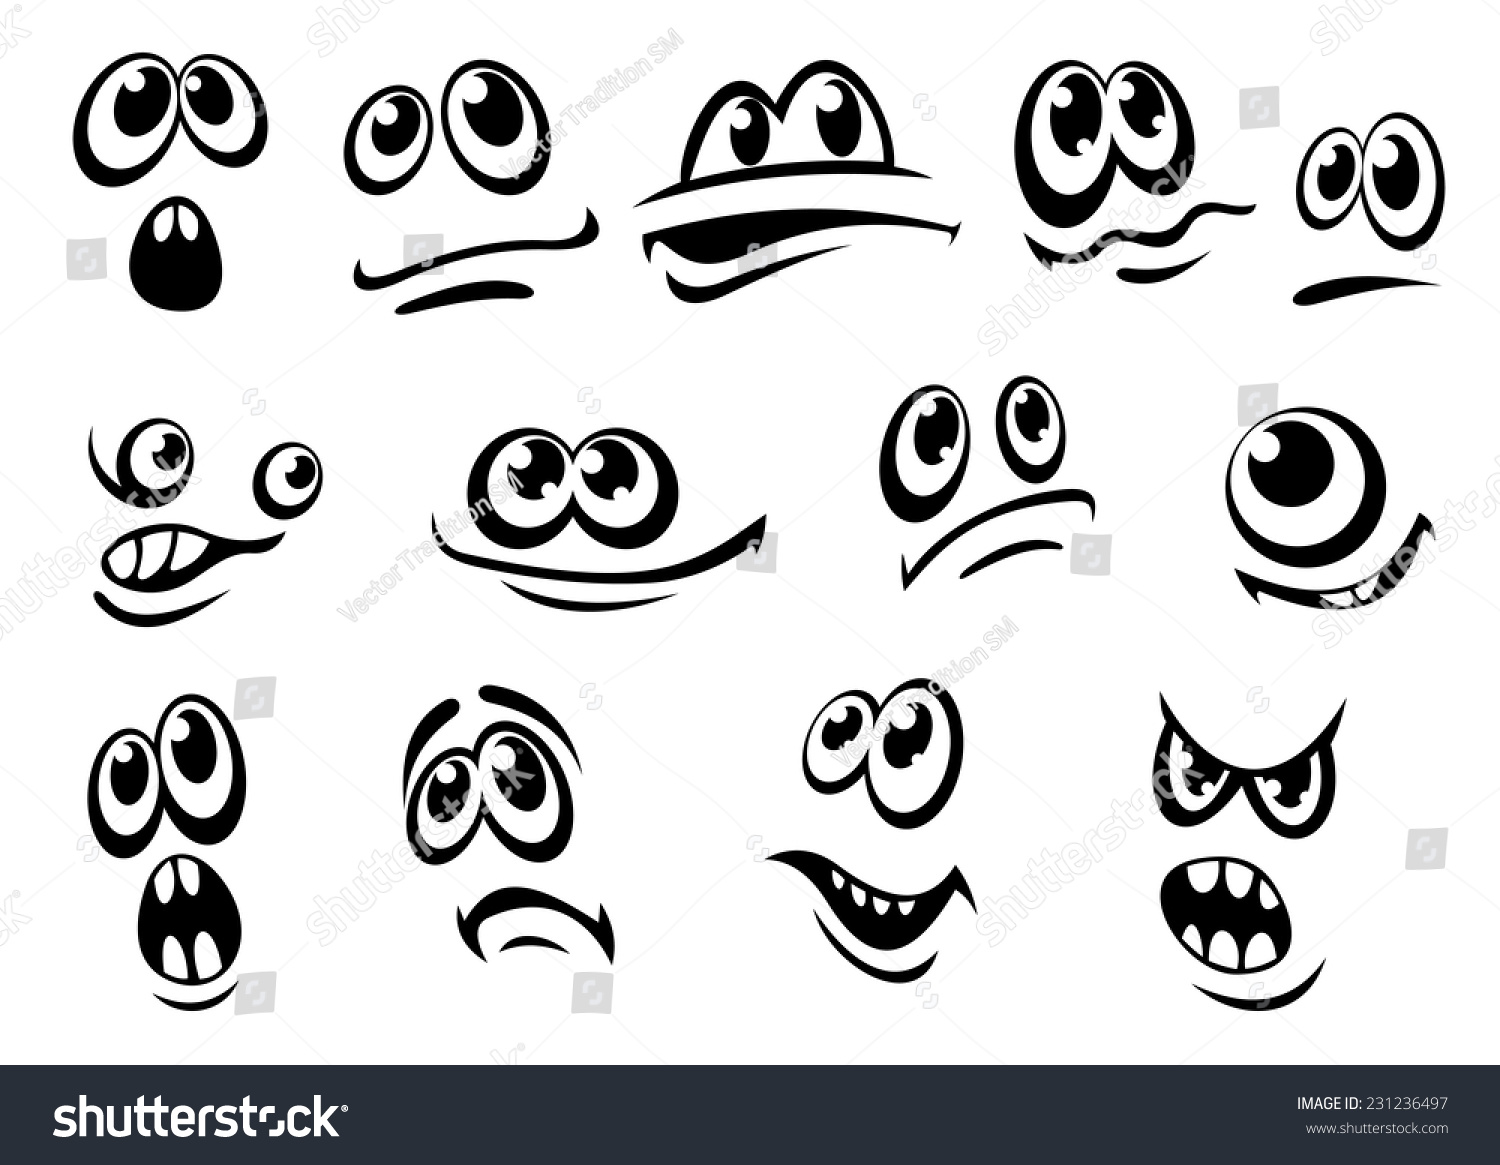 Cute Different Black White Facial Expressions Stock Vector 231236497 ...